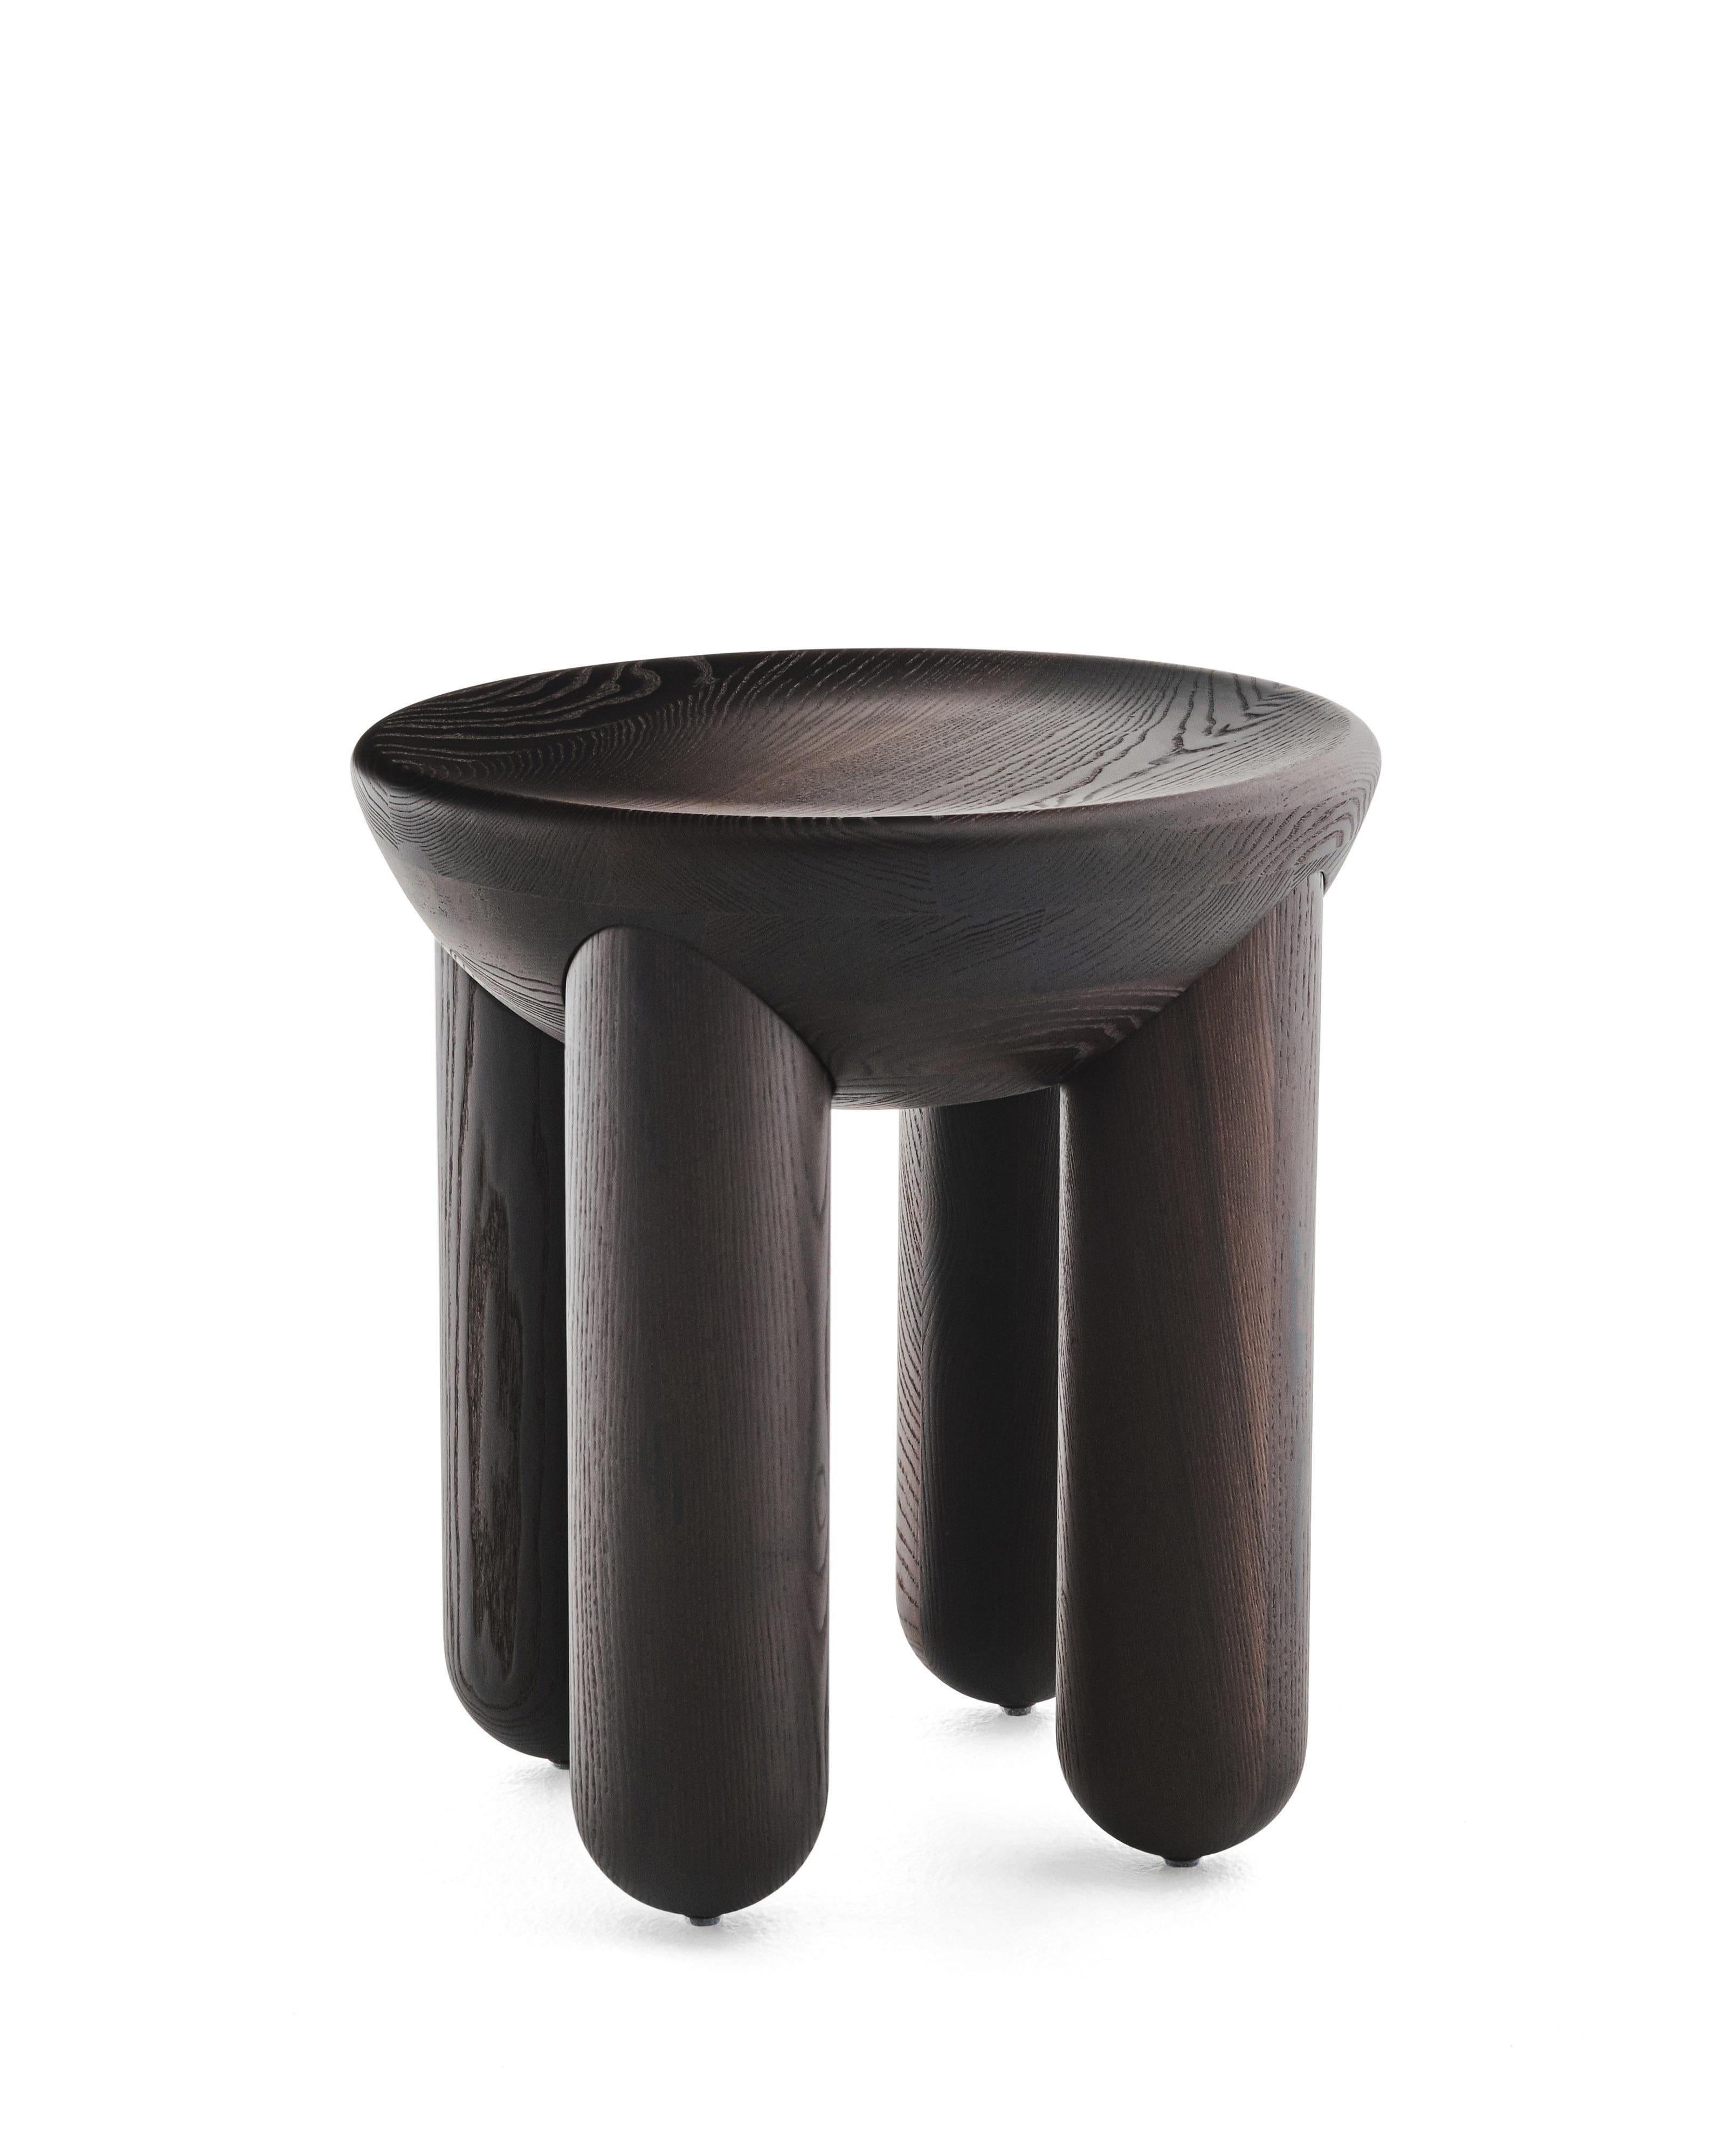 Organique Table basse ou d'appoint contemporaine 'Freyja 3' by NoOM, Thermo Ash en vente